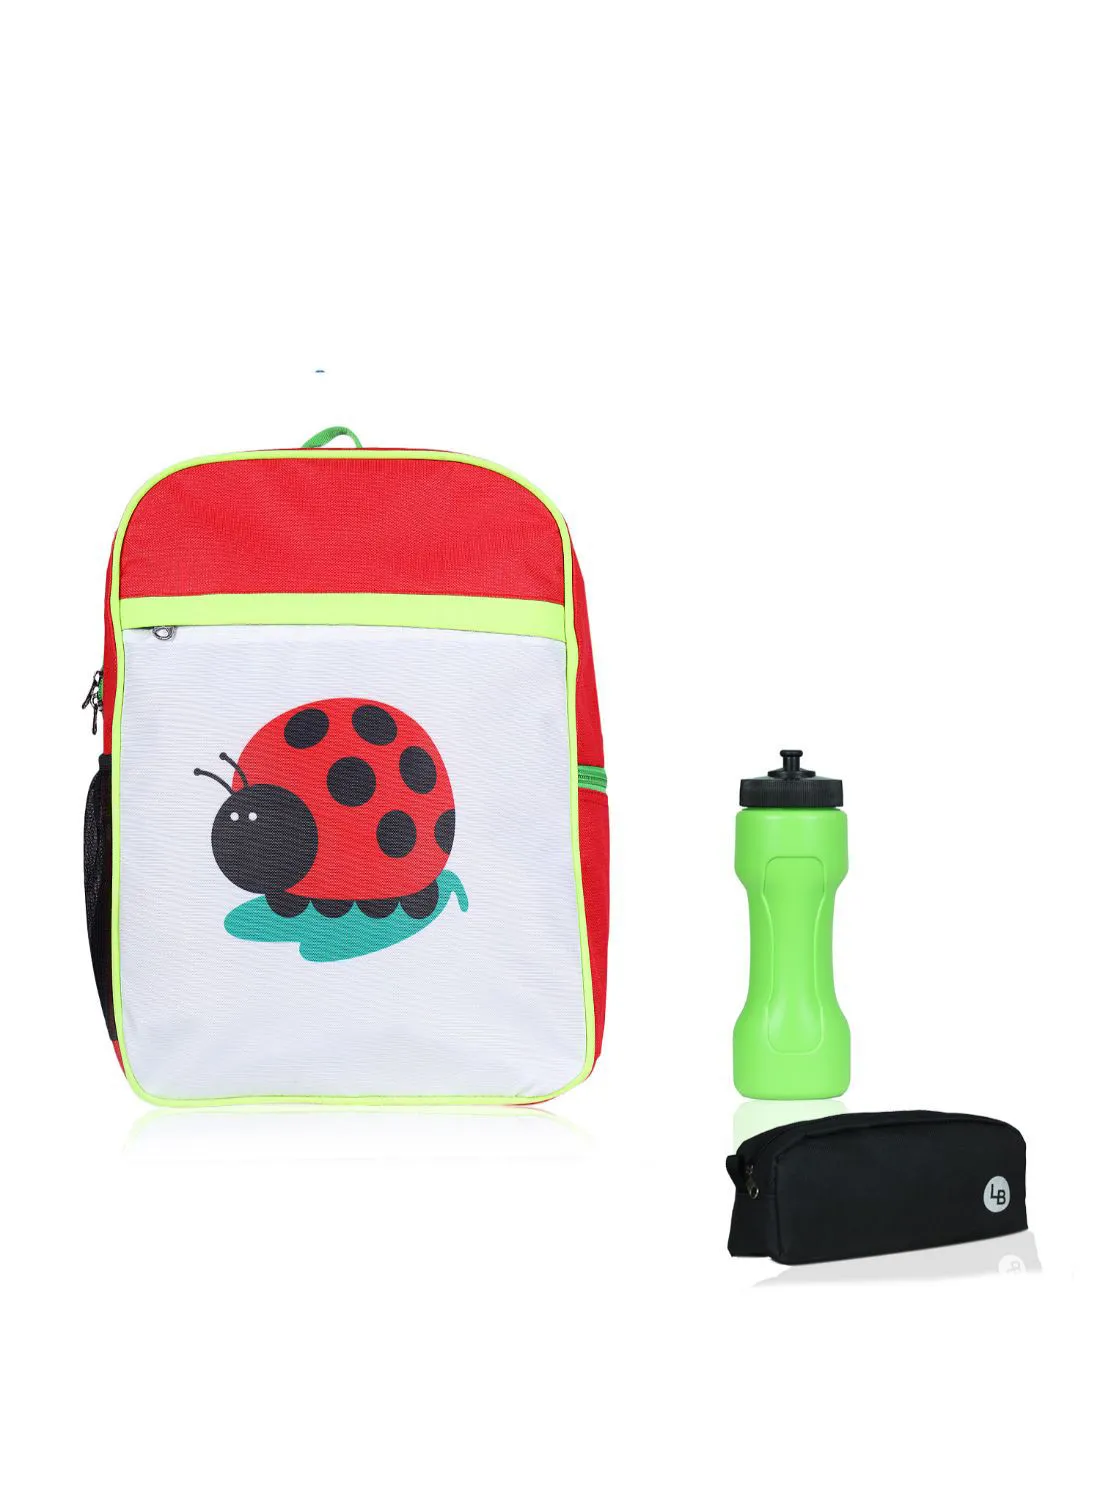 LIONBONE Ladybug Printed Polyester Kids Backpack with zip closure Ideal for 4-6 years age group, Plastic Sipper And Polyester Pouch Multicolour